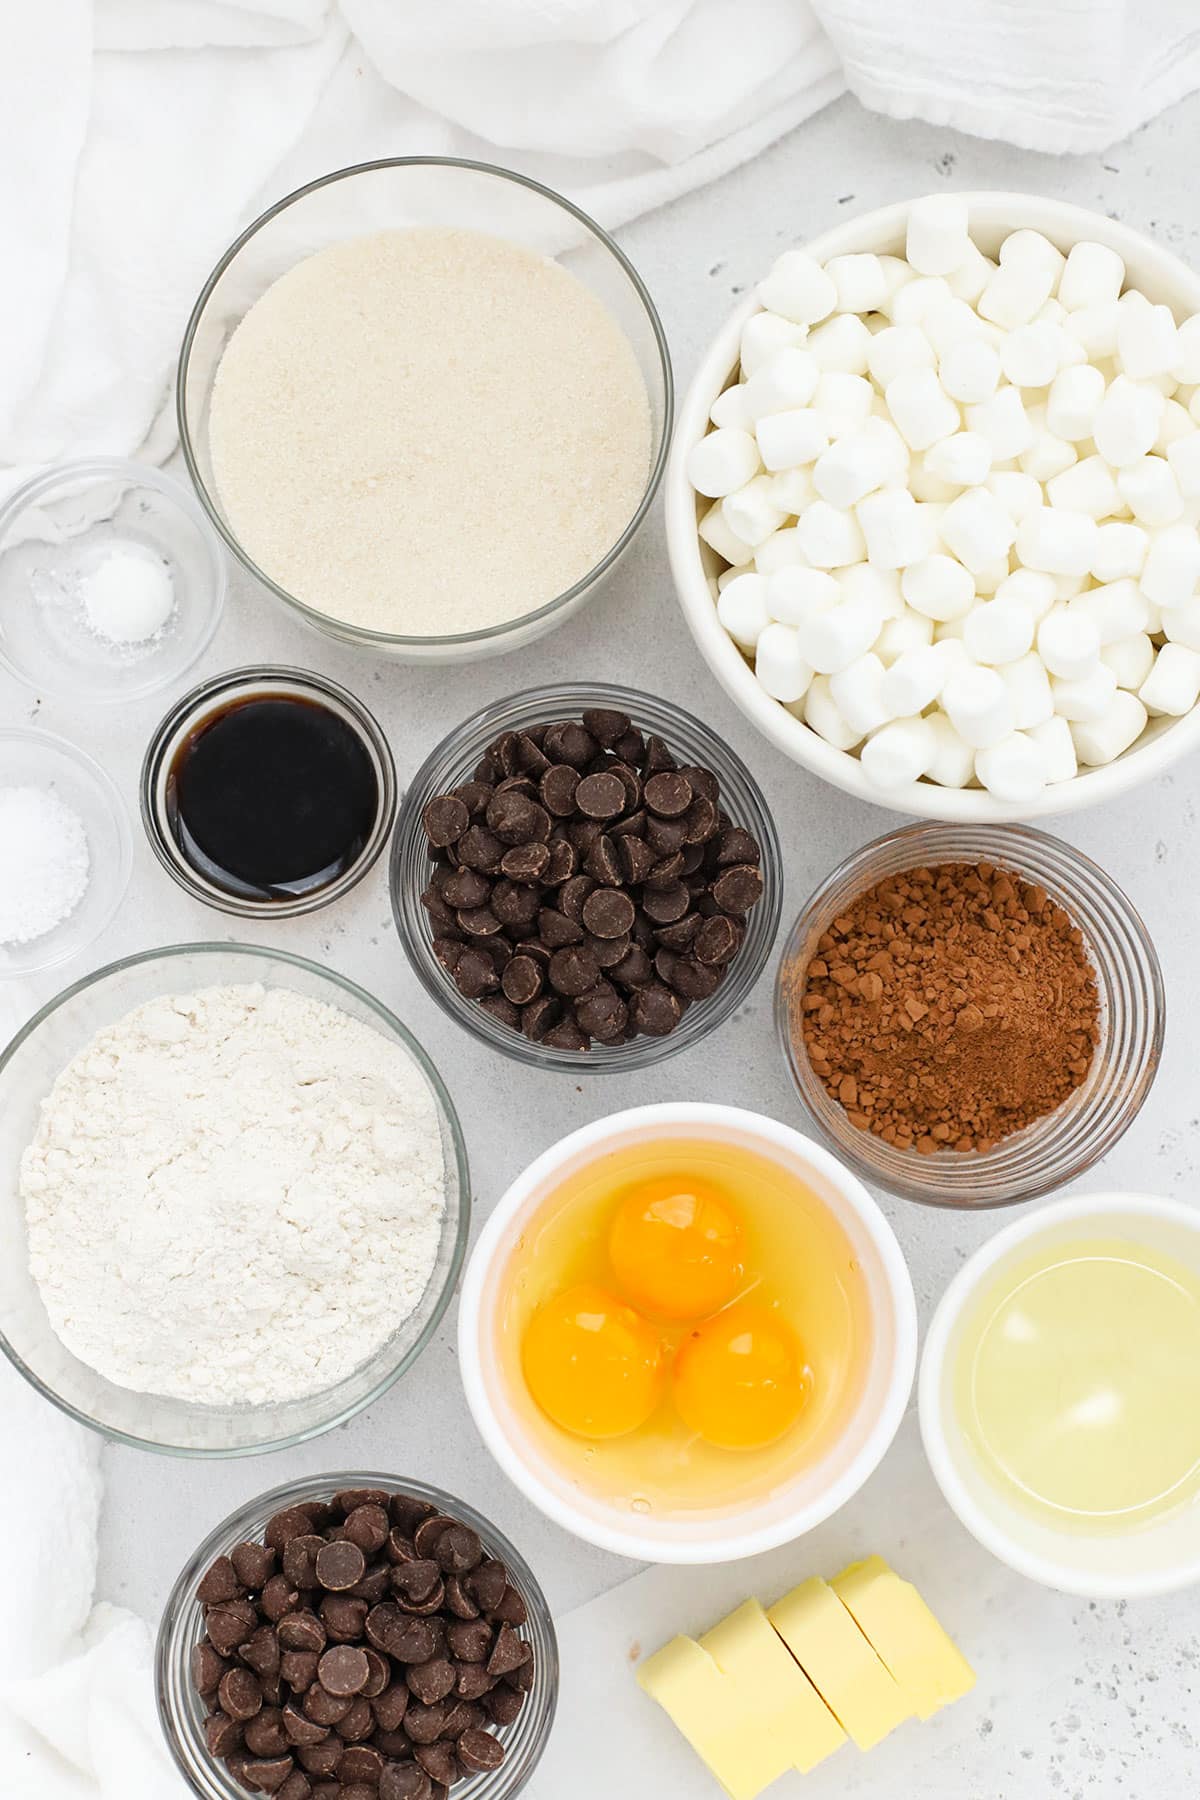 Ingredients for gluten-free marshmallow brownies